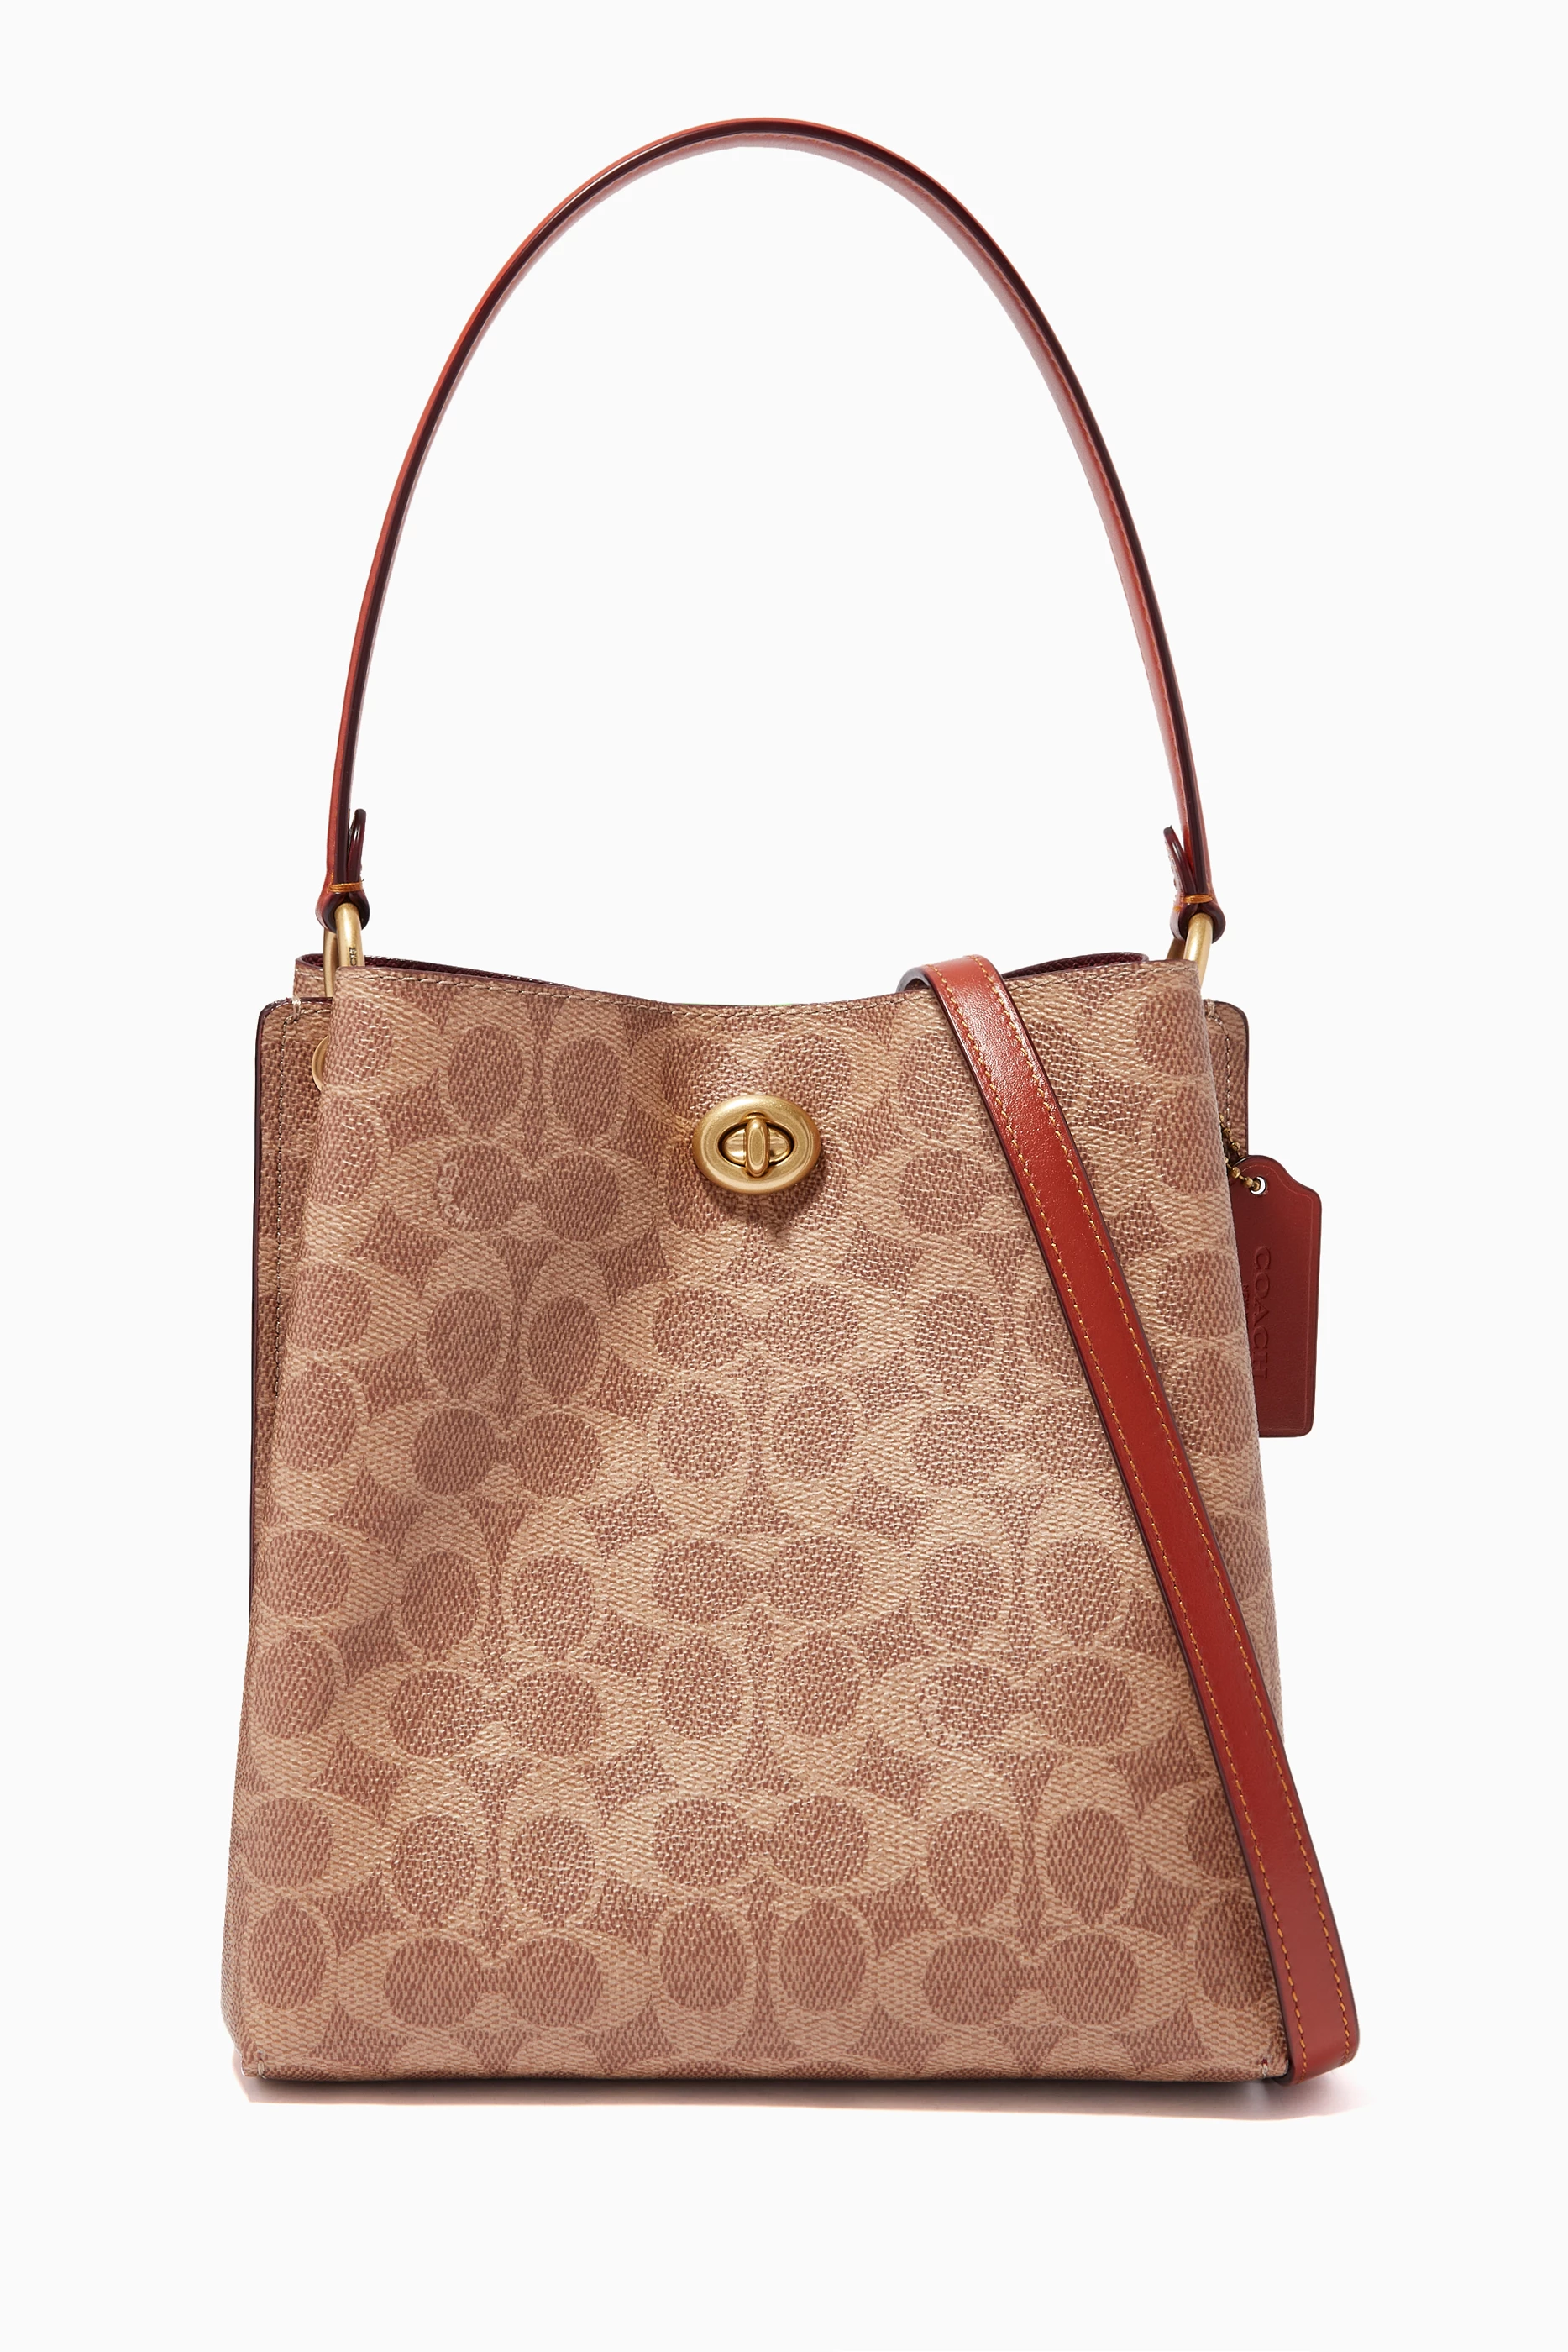 Coach Charlie Bucket Bag In Signature Canvas